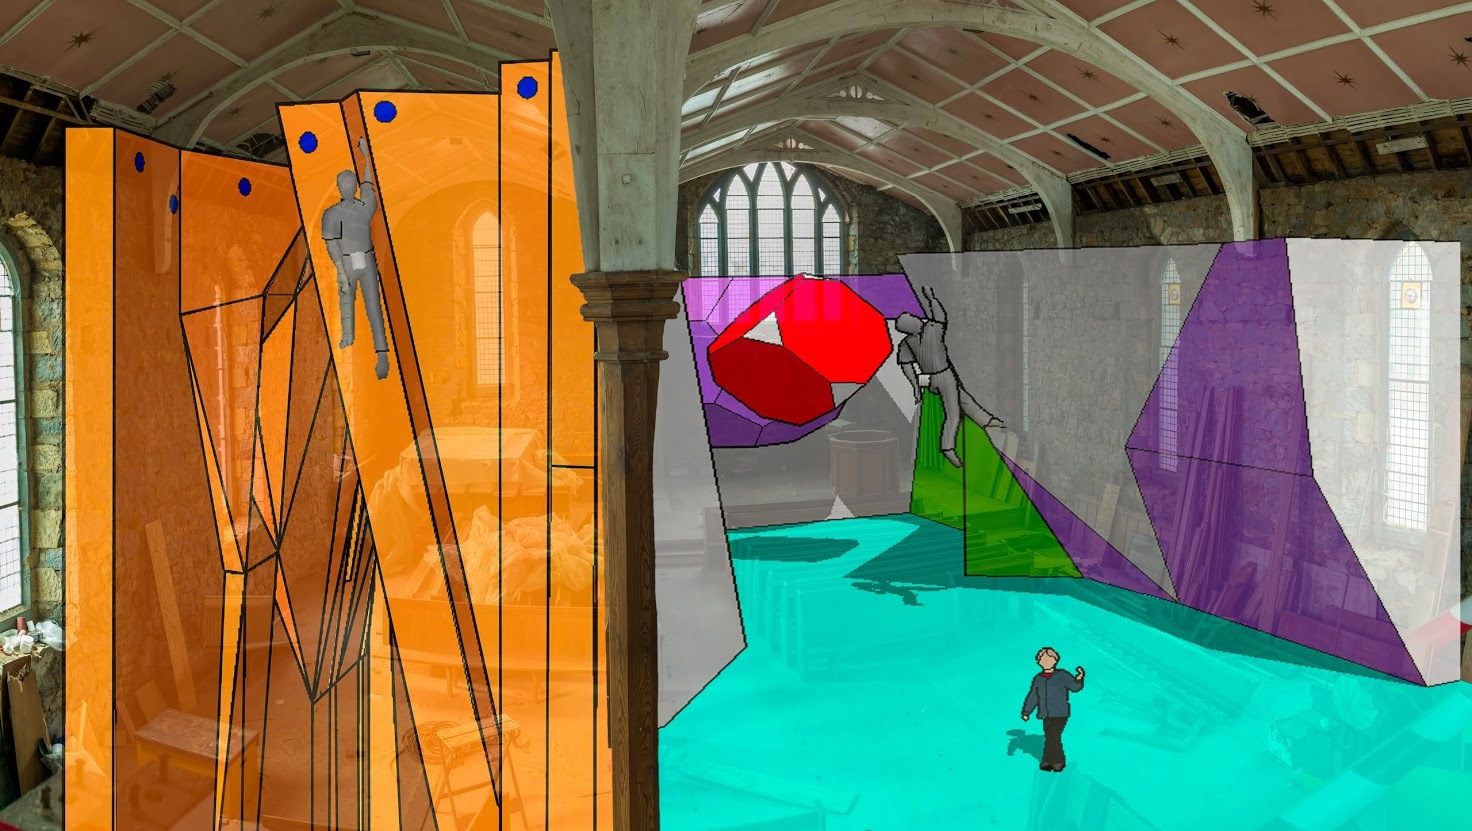 Artist's impression of the climbing walls in the church